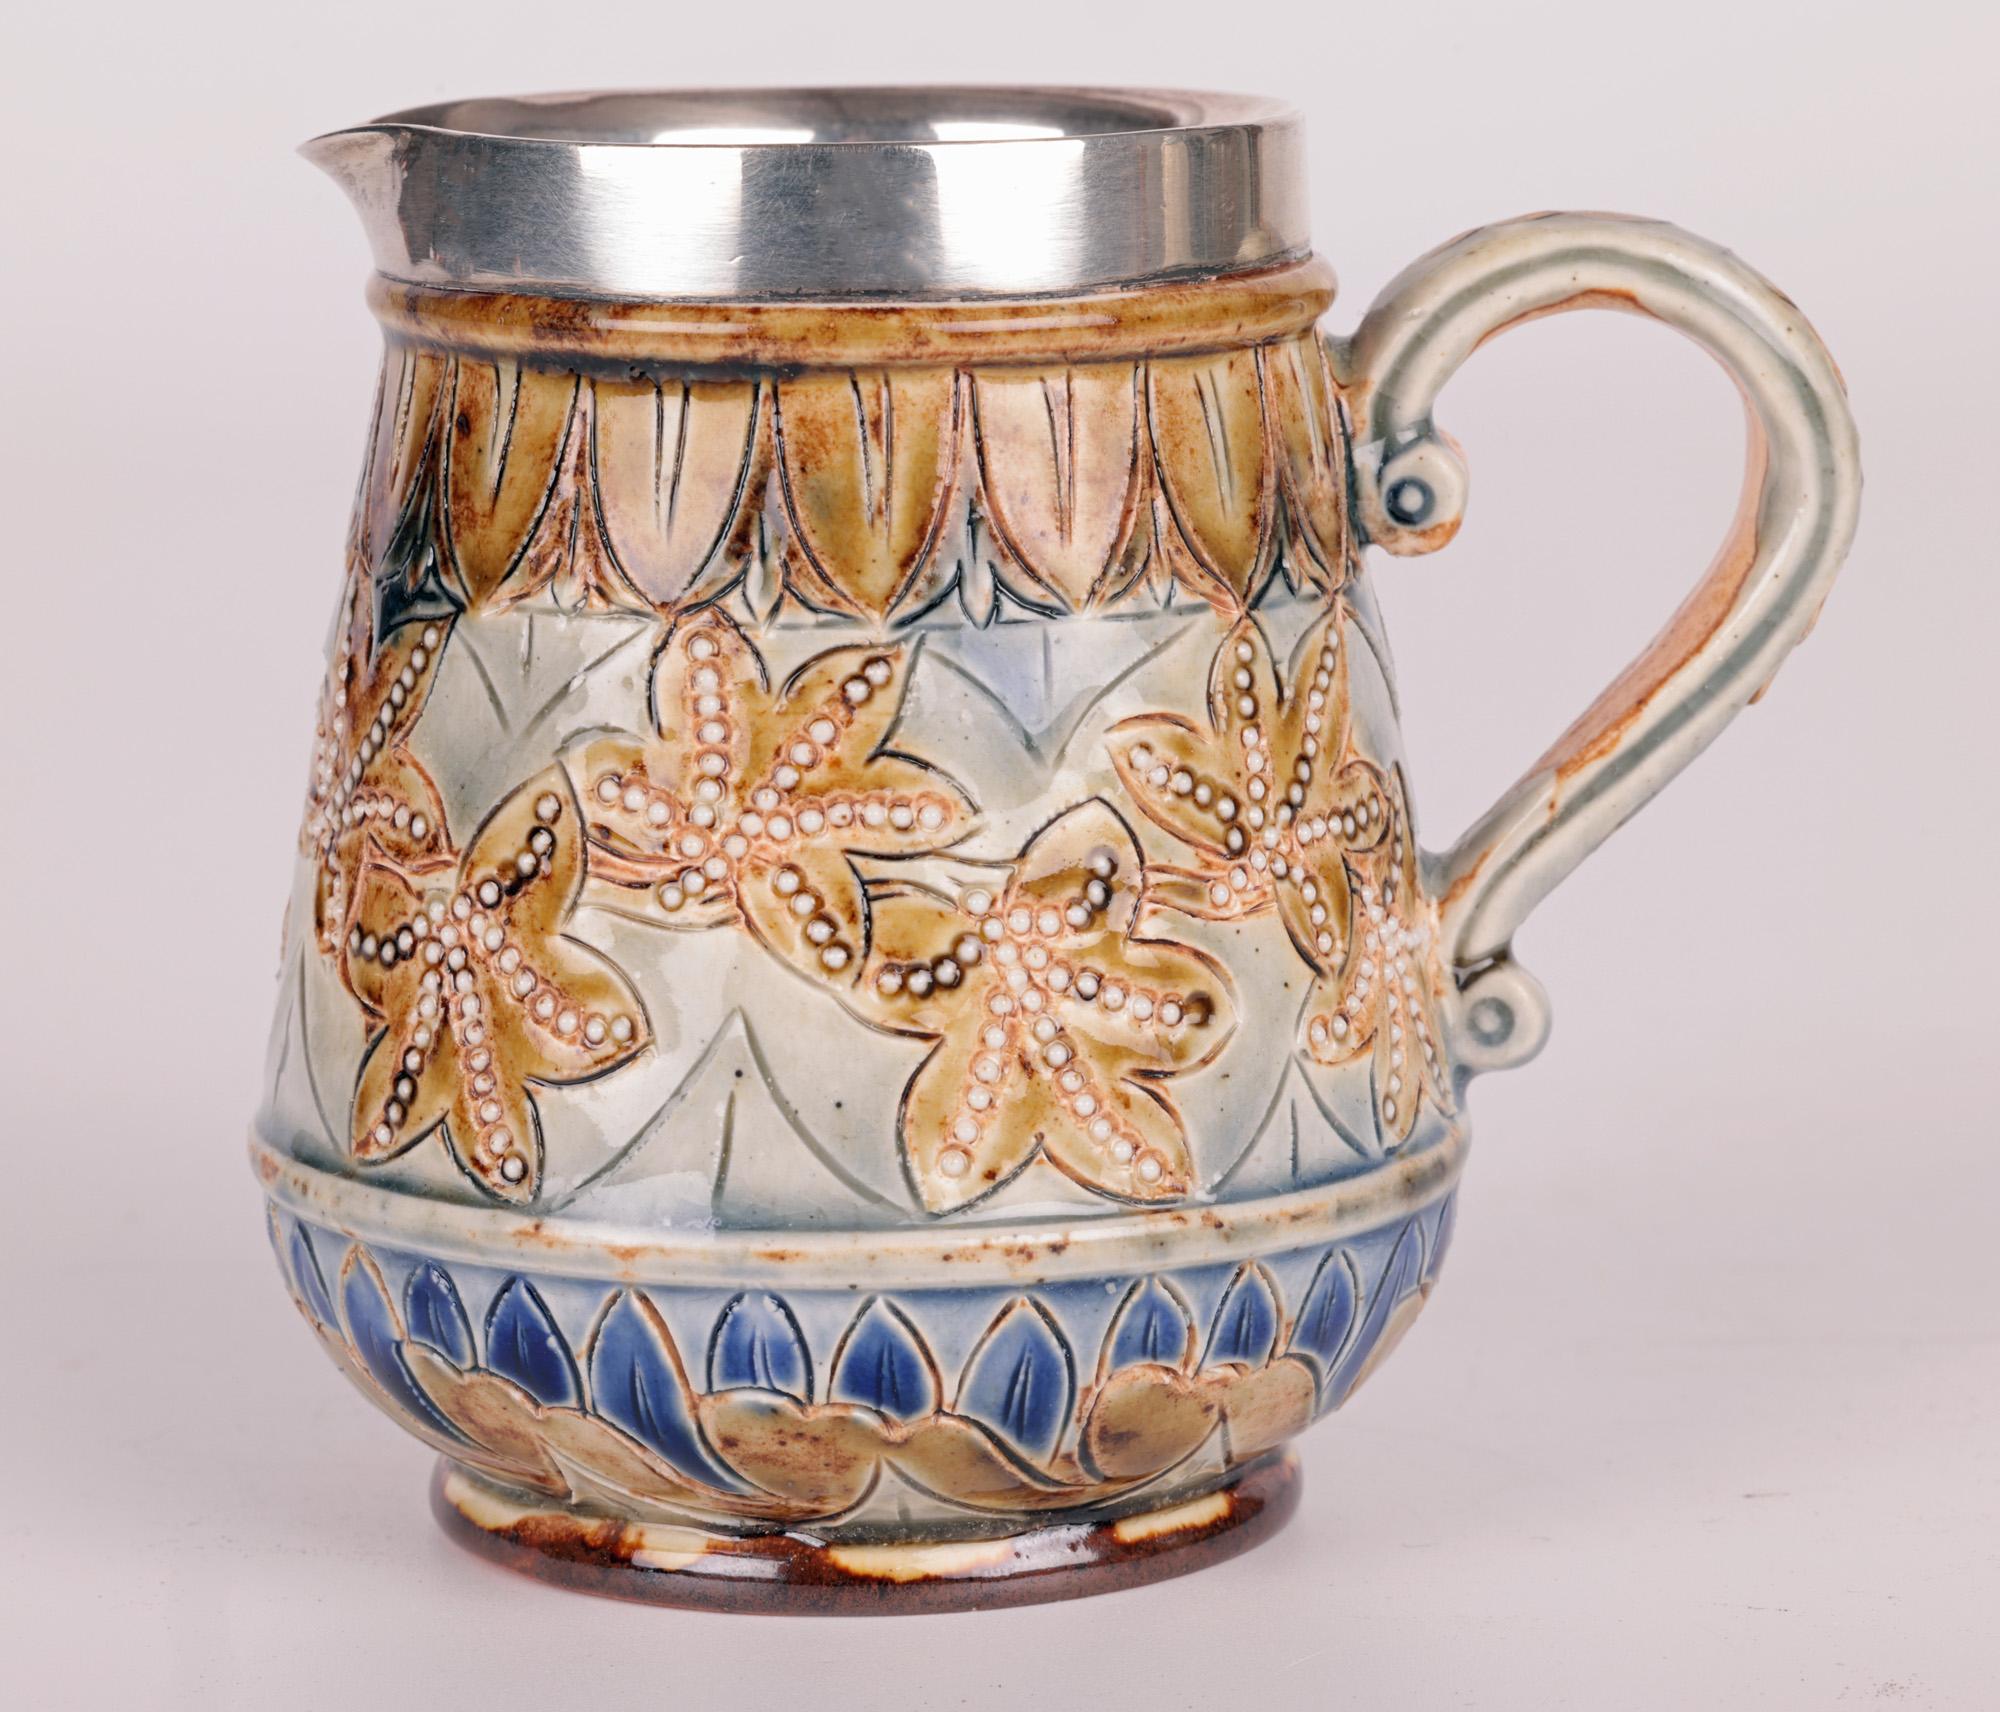 Doulton Lambeth Silver Mounted Cream Jug by Francis E Lee, 1877 For Sale 11